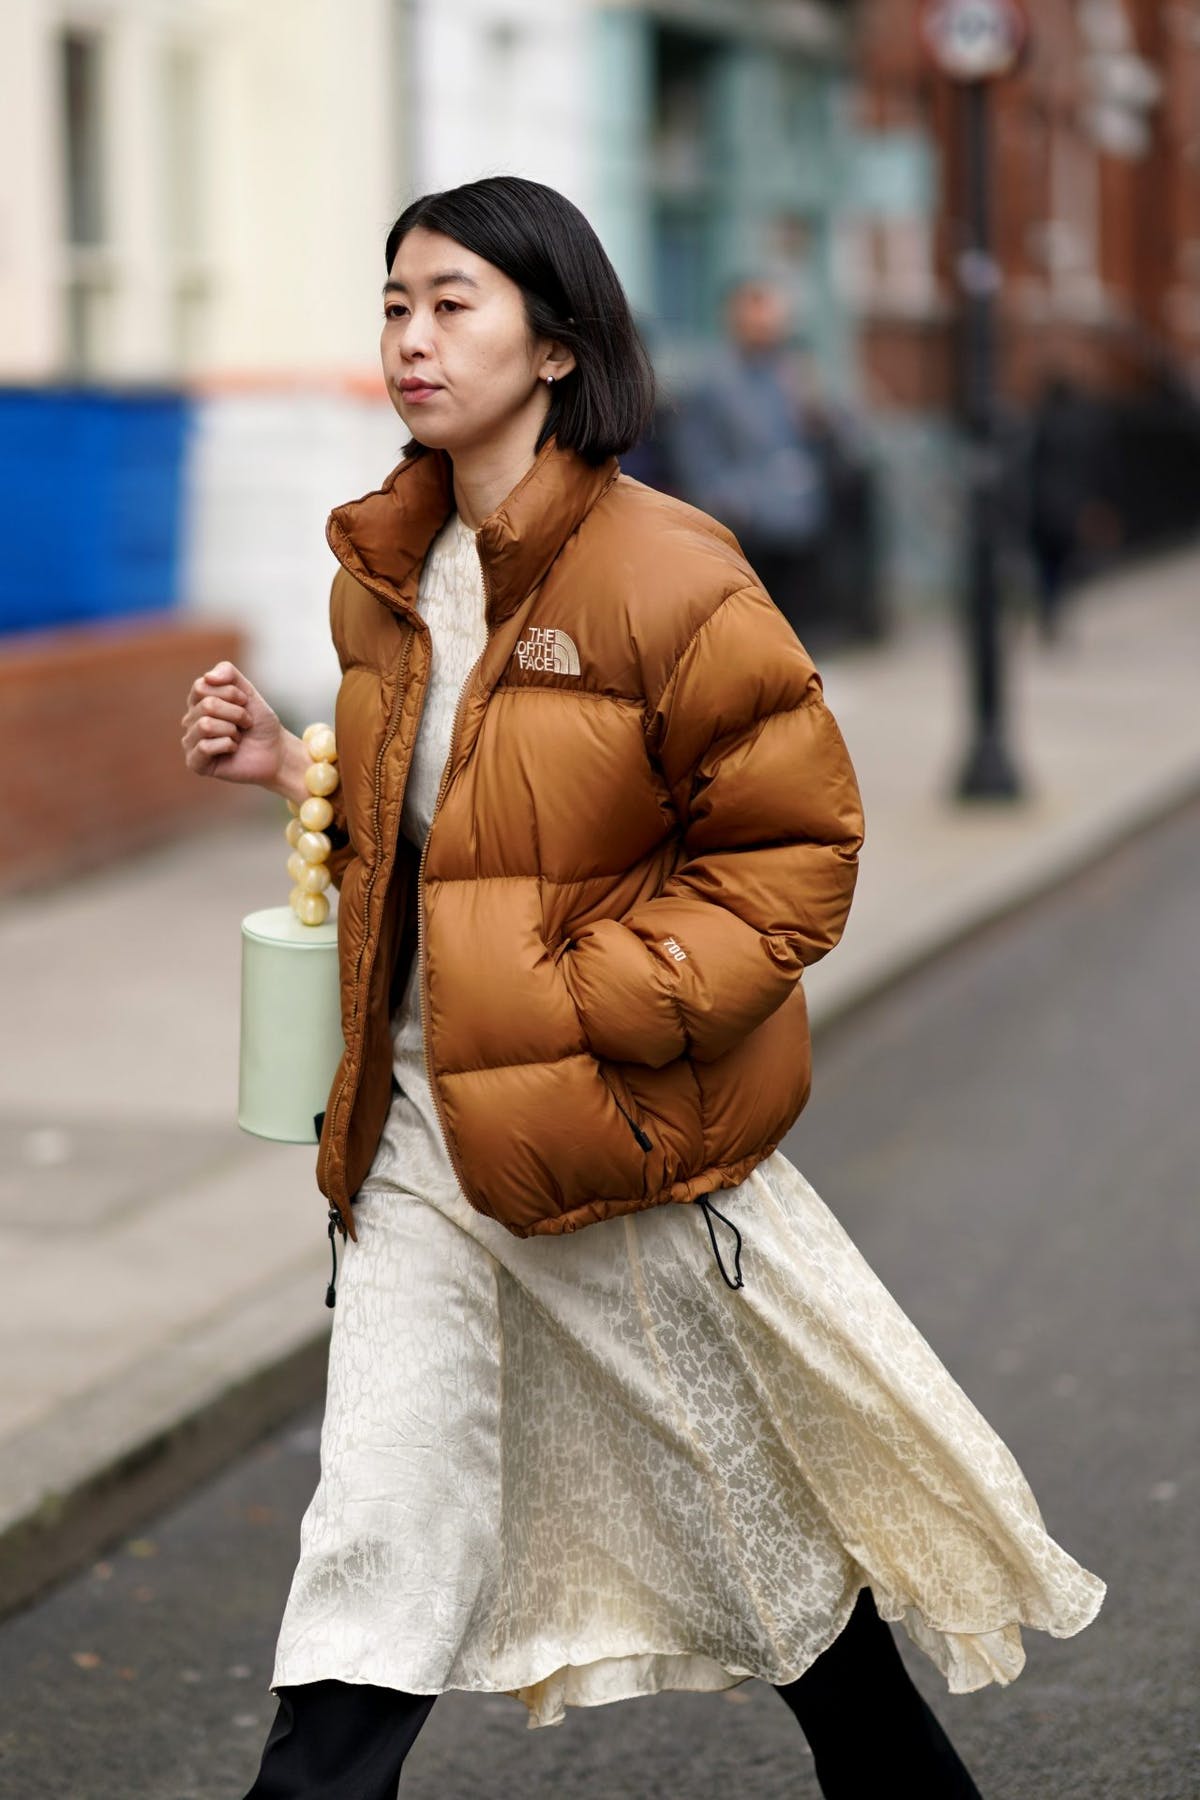 The North Face Jacket So Popular Searches For This Particular Winter Puffer Style Are Constantly On The Rise Nestia